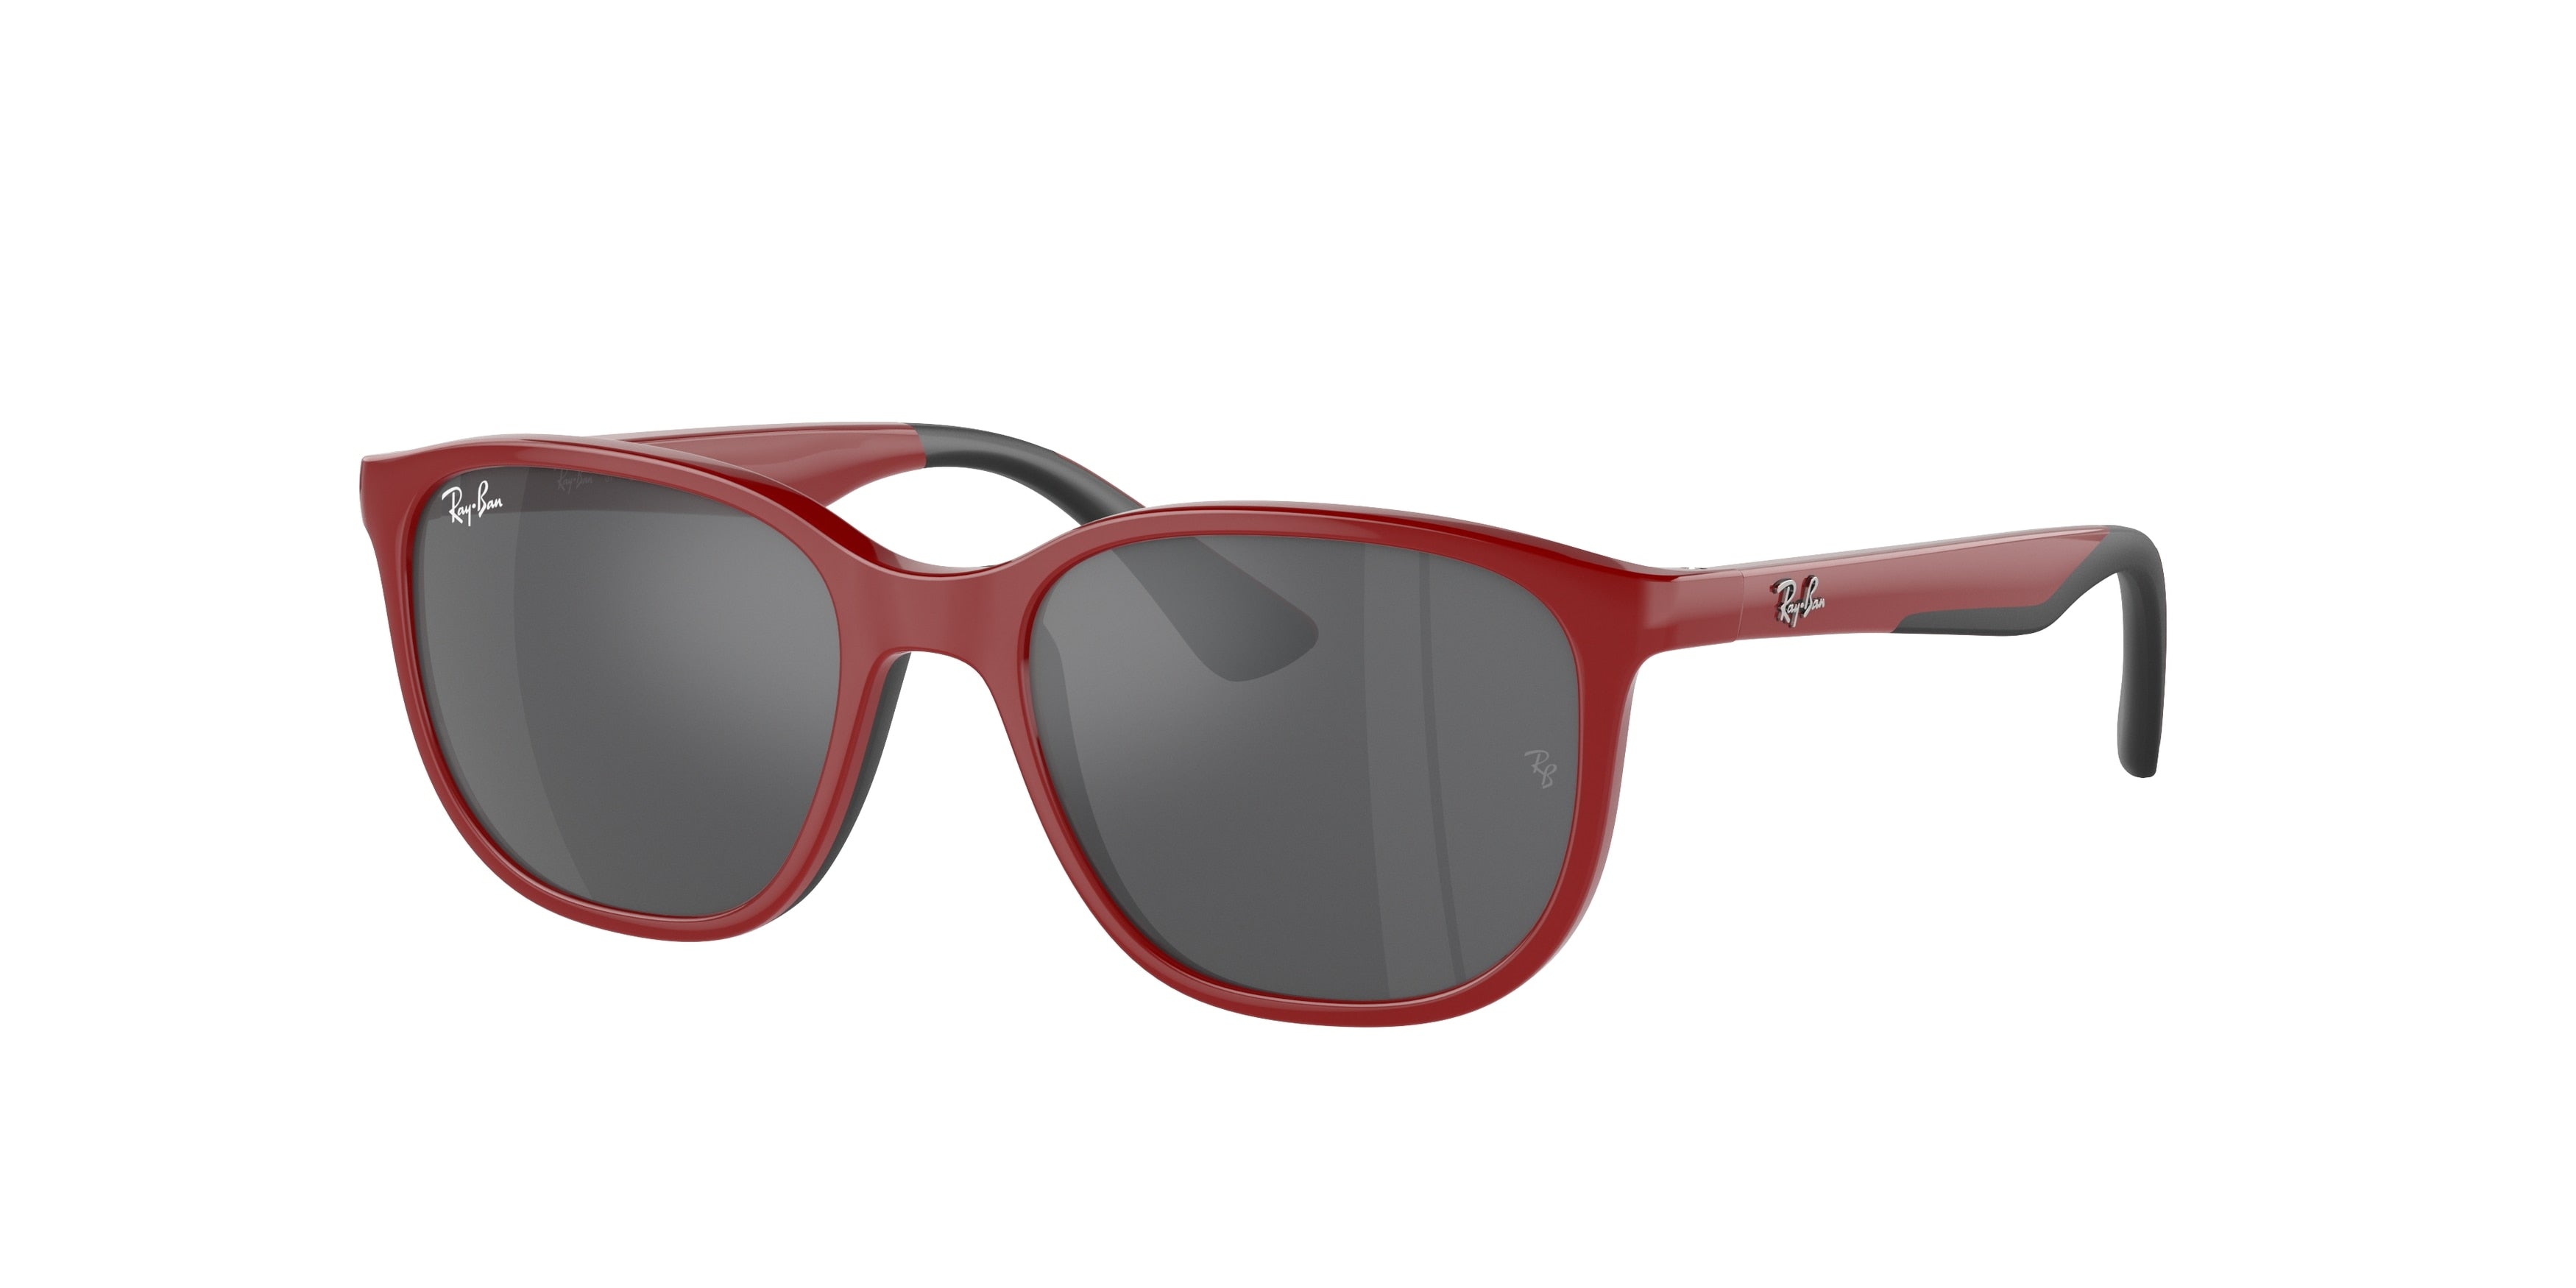 Ray-Ban Junior RJ9078S Square Sunglasses  71506G-Red On Black 48-135-16 - Color Map Red